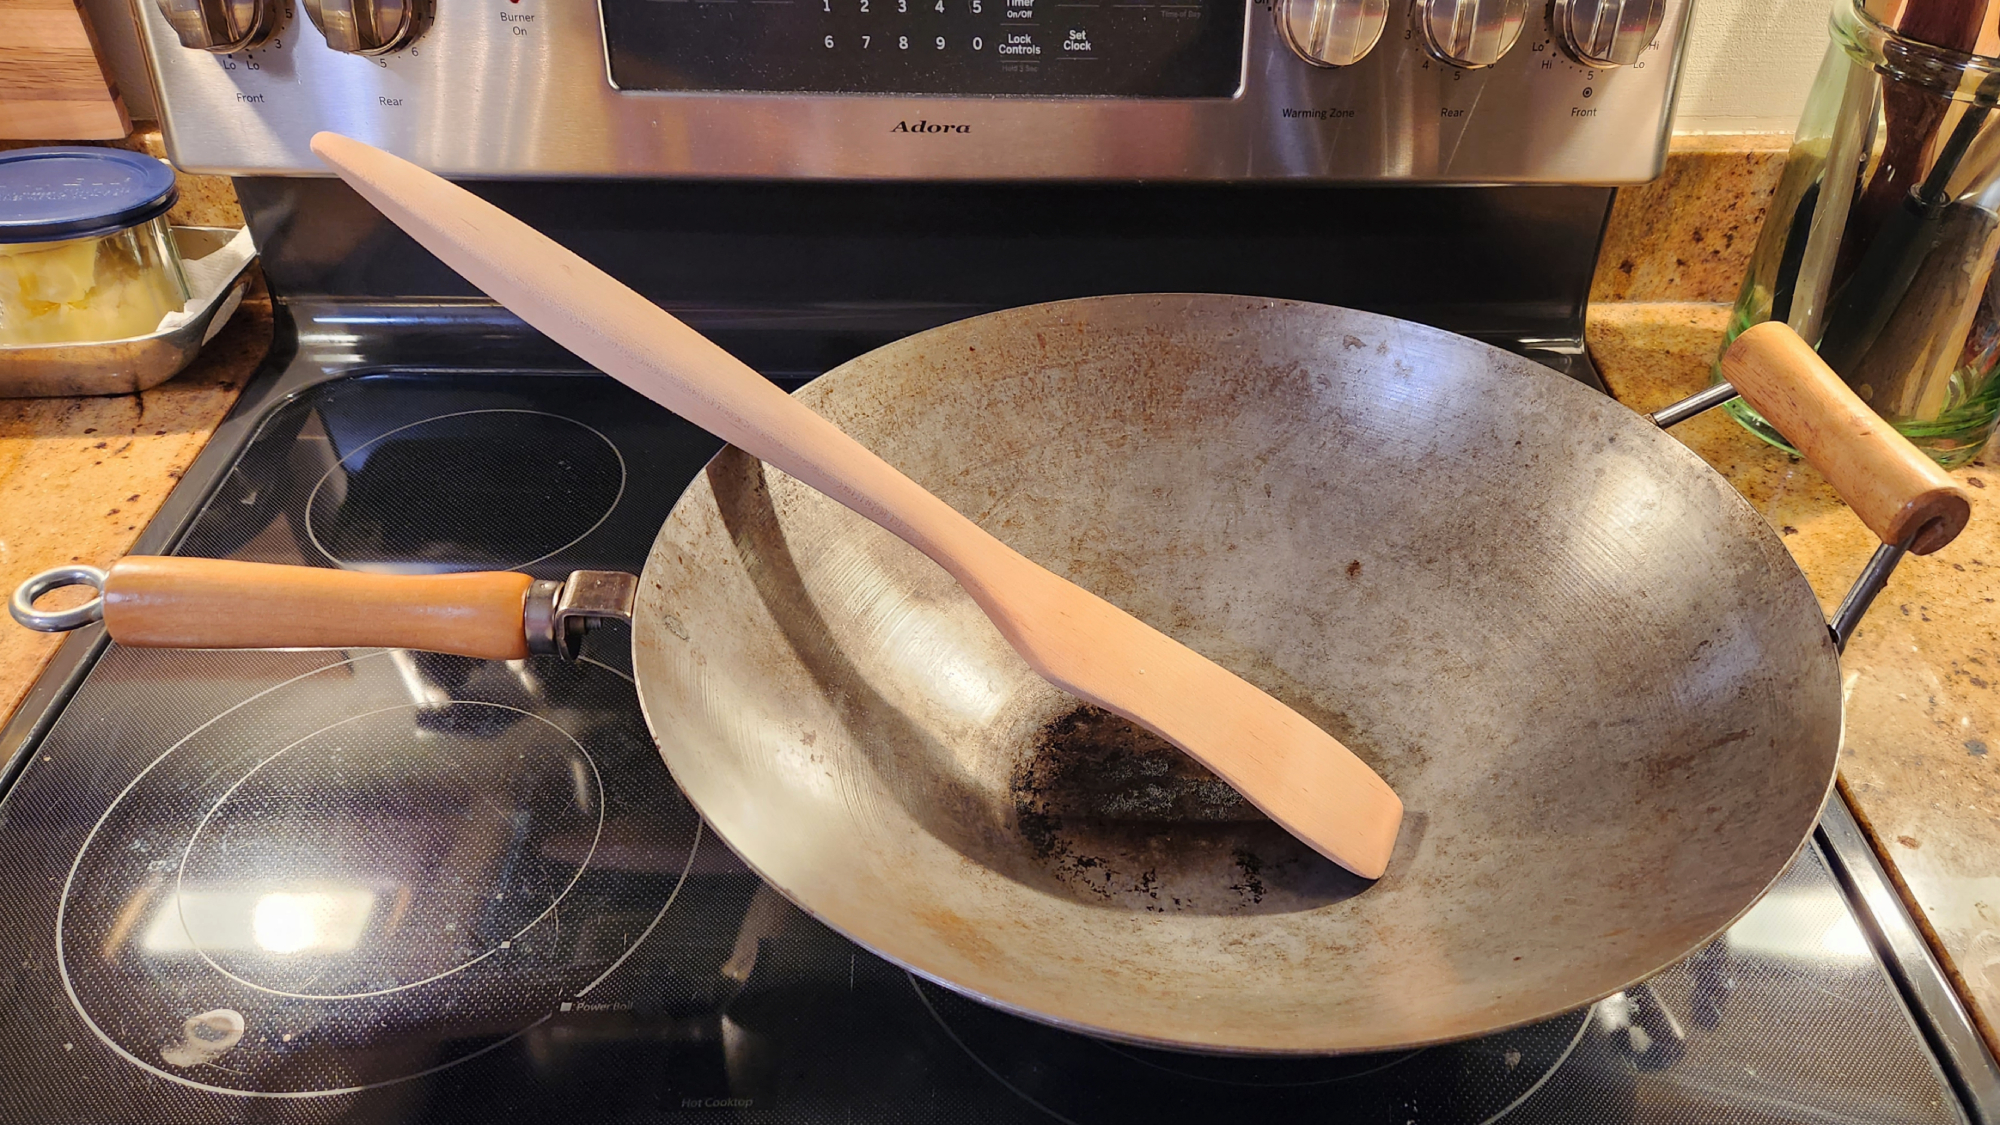 A homemade wooden spoon or spatula inside an empty wok on a black electric stove.